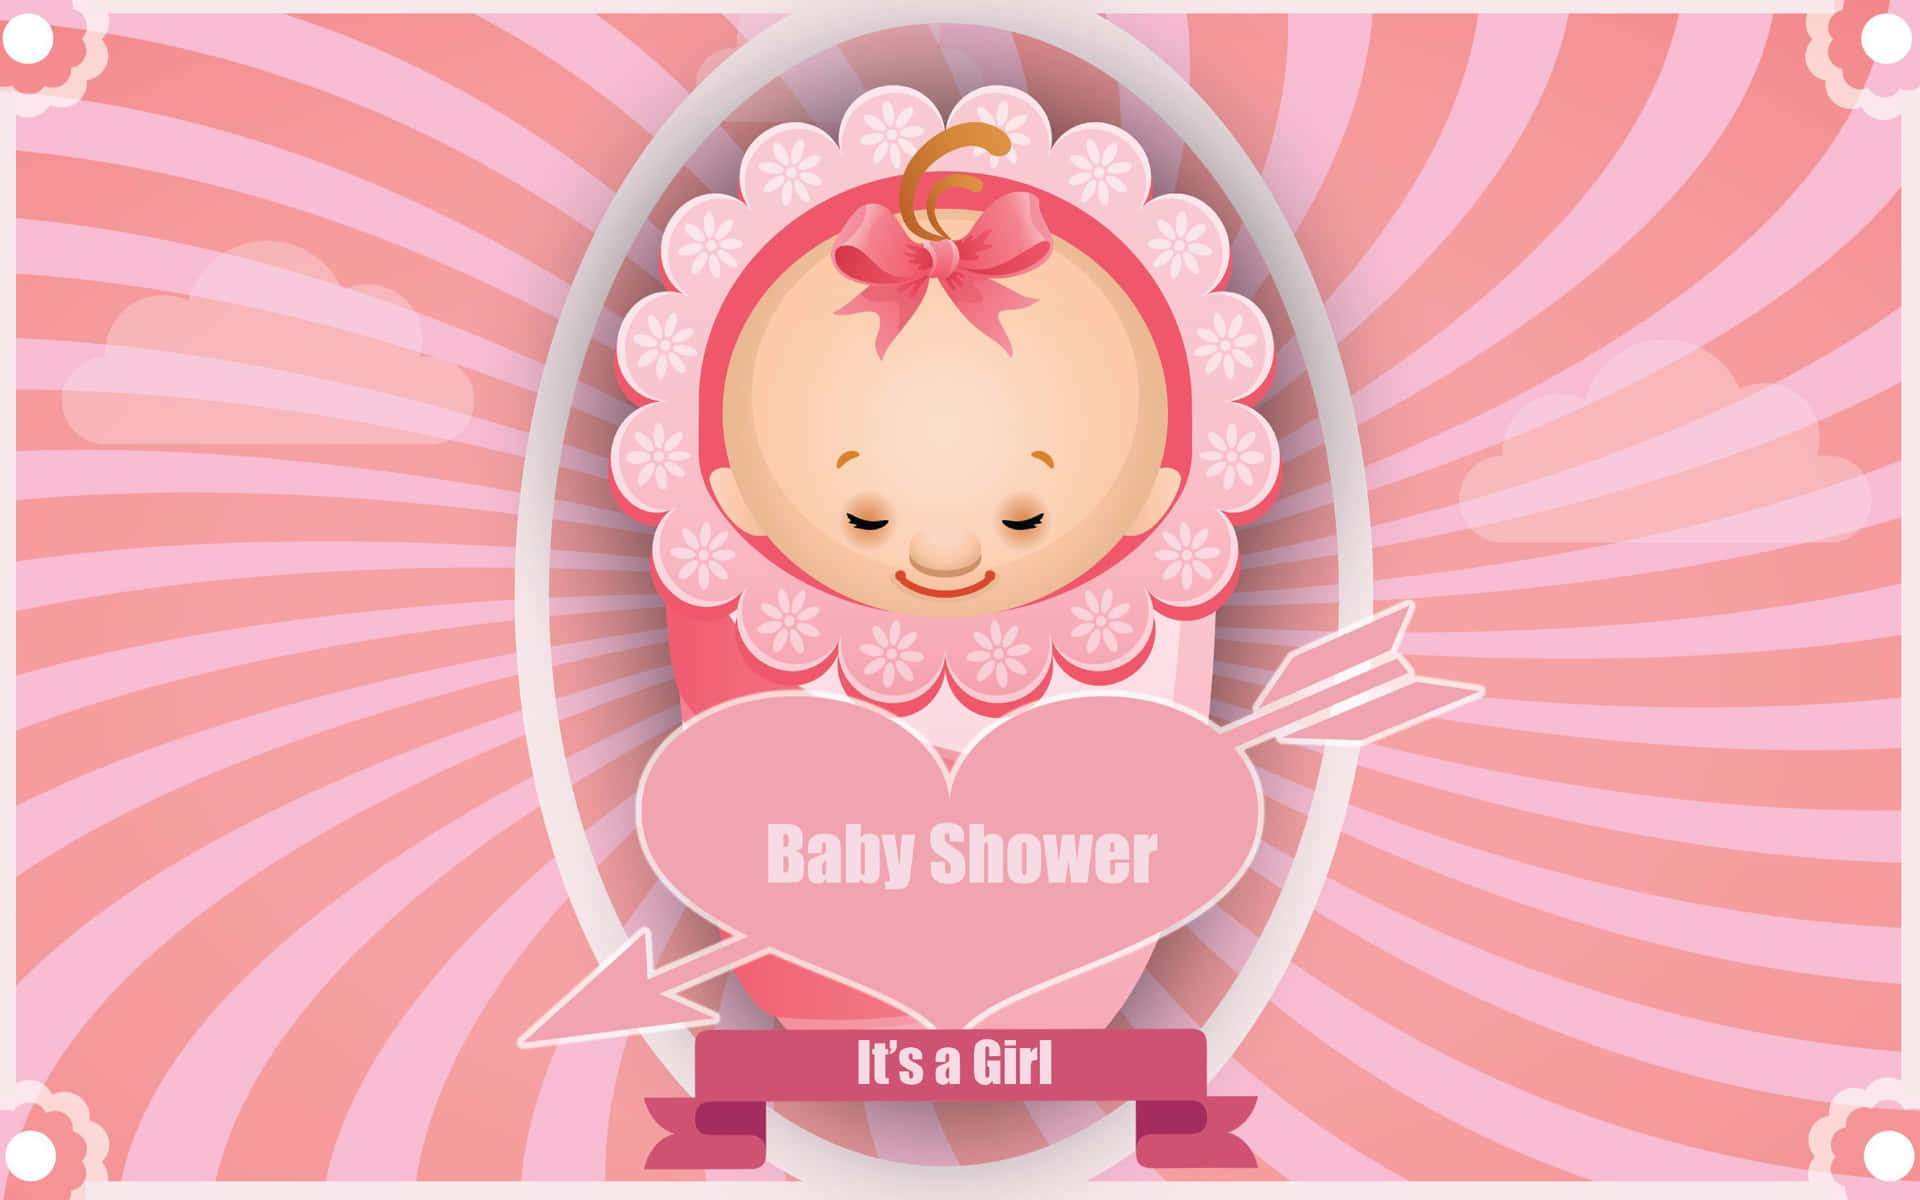 Adorable Baby Shower Background with cute elements